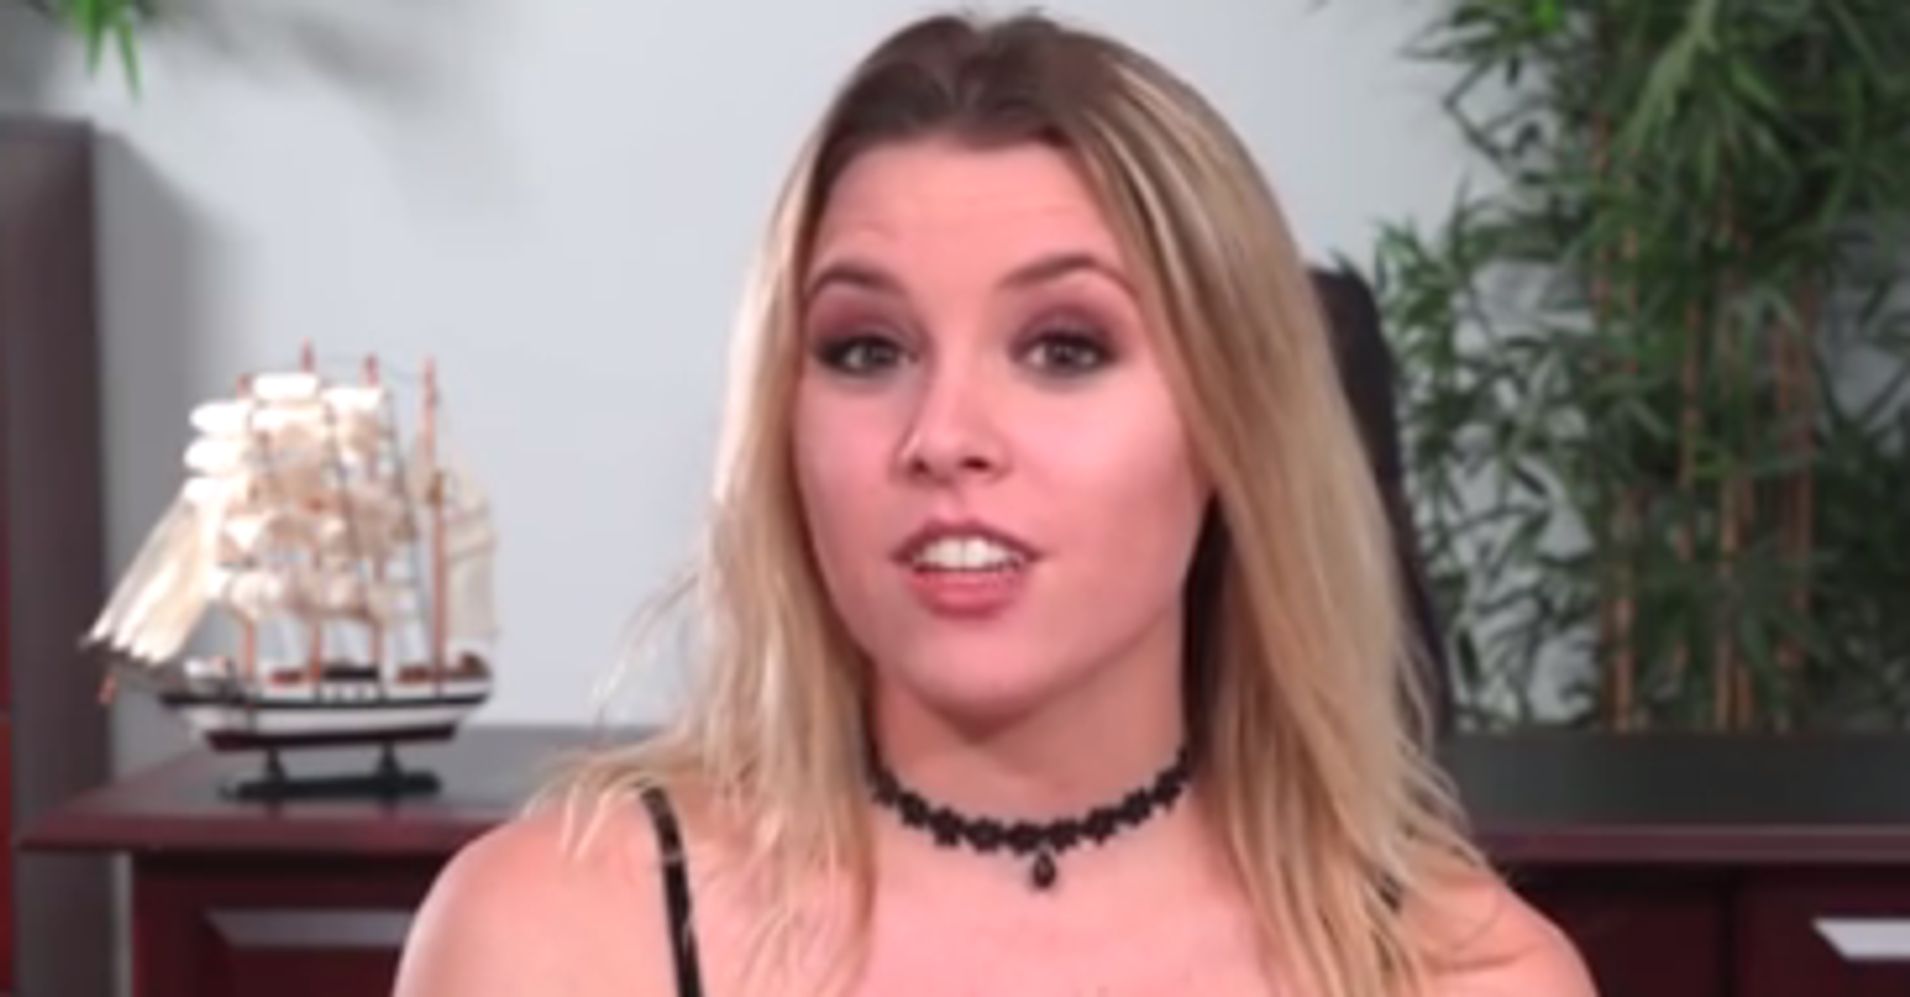 Porn Stars Reveal What They Would Do If They Were President Huffpost 